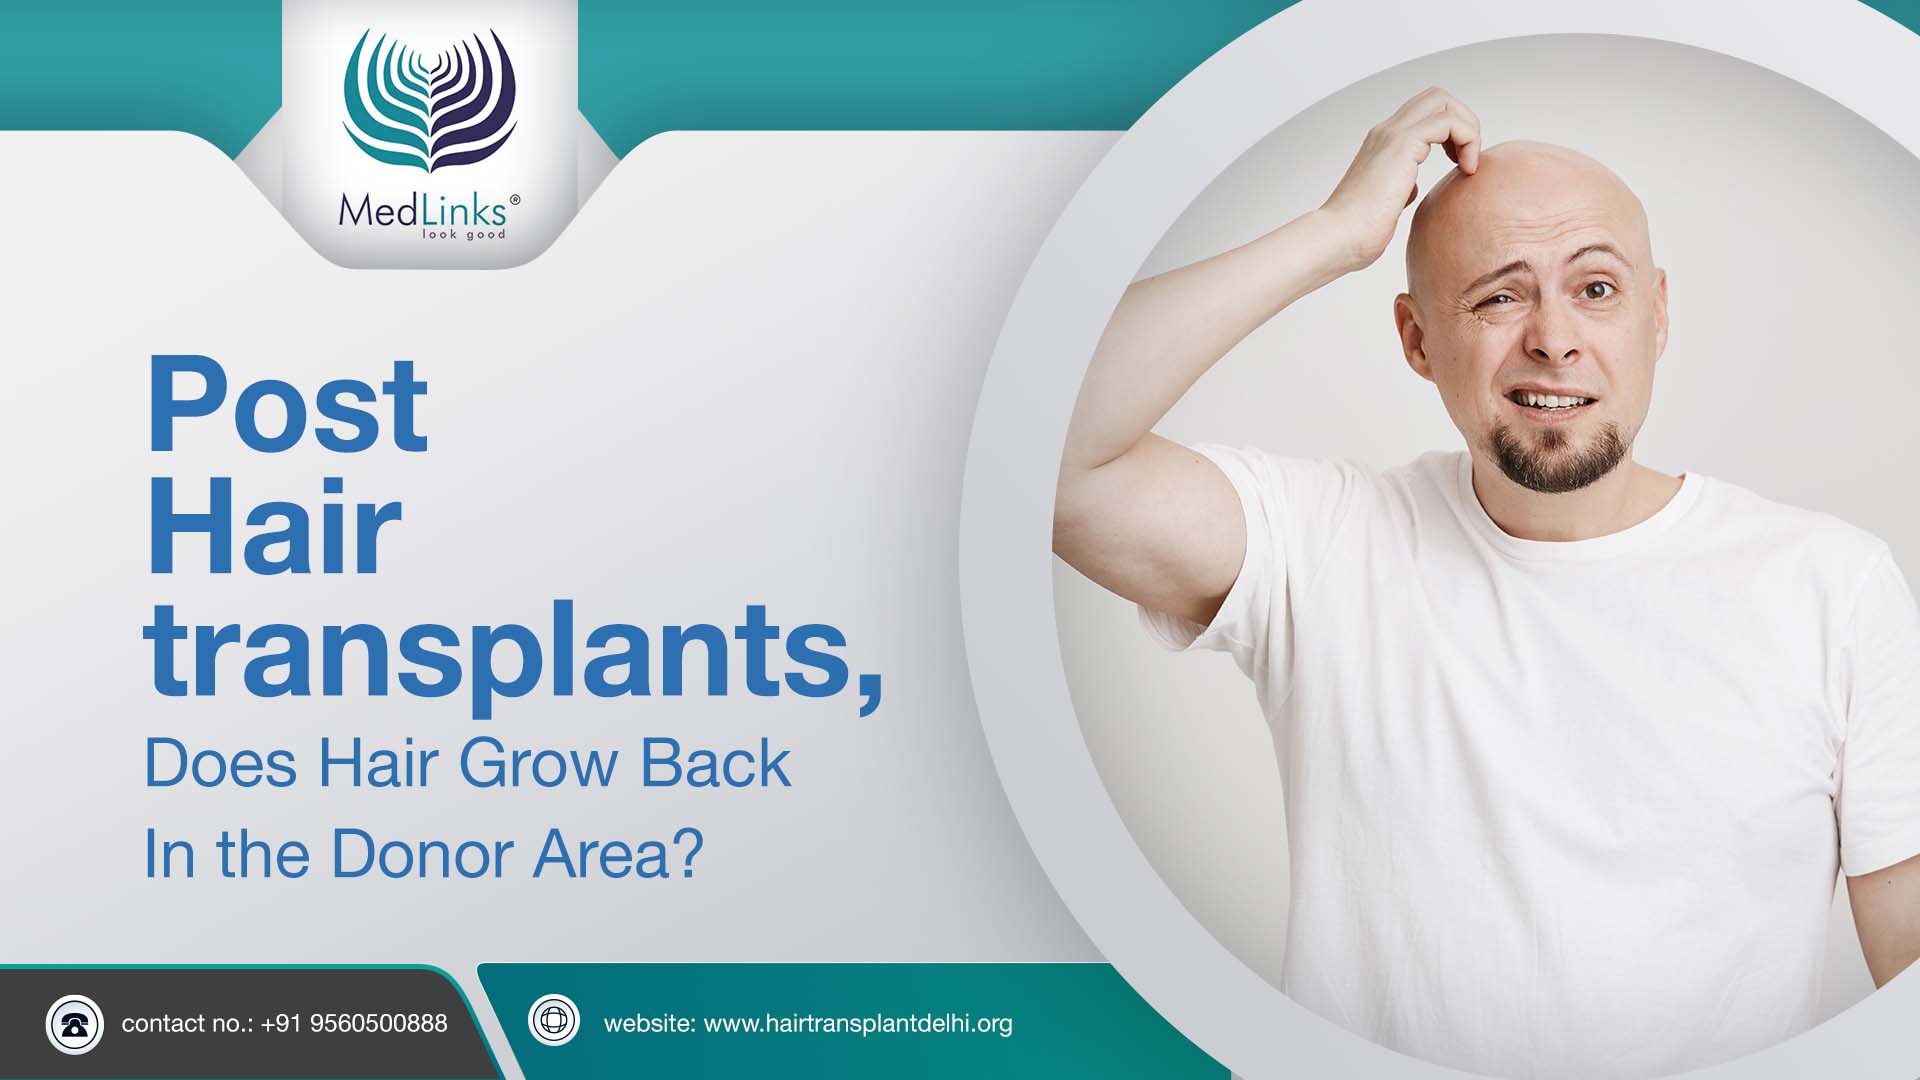 Post Hair transplant | Does Hair Grow Back In the Donor Area?